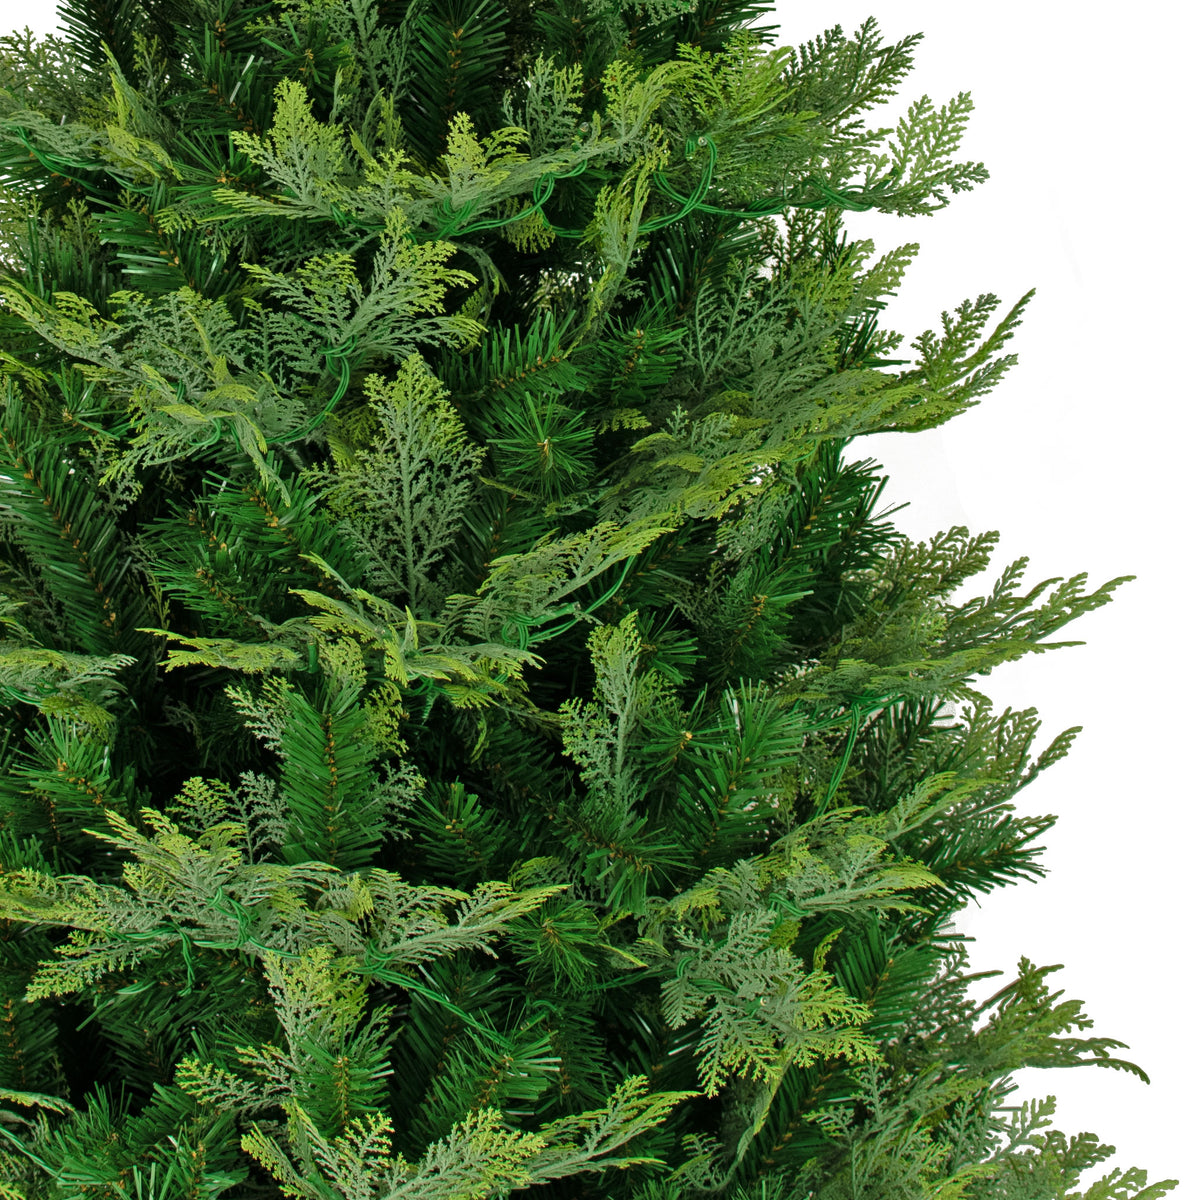 This exquisite Leyland Cypress Christmas tree transforms any space into a winter wonderland, combining modern sophistication with timeless festive charm.